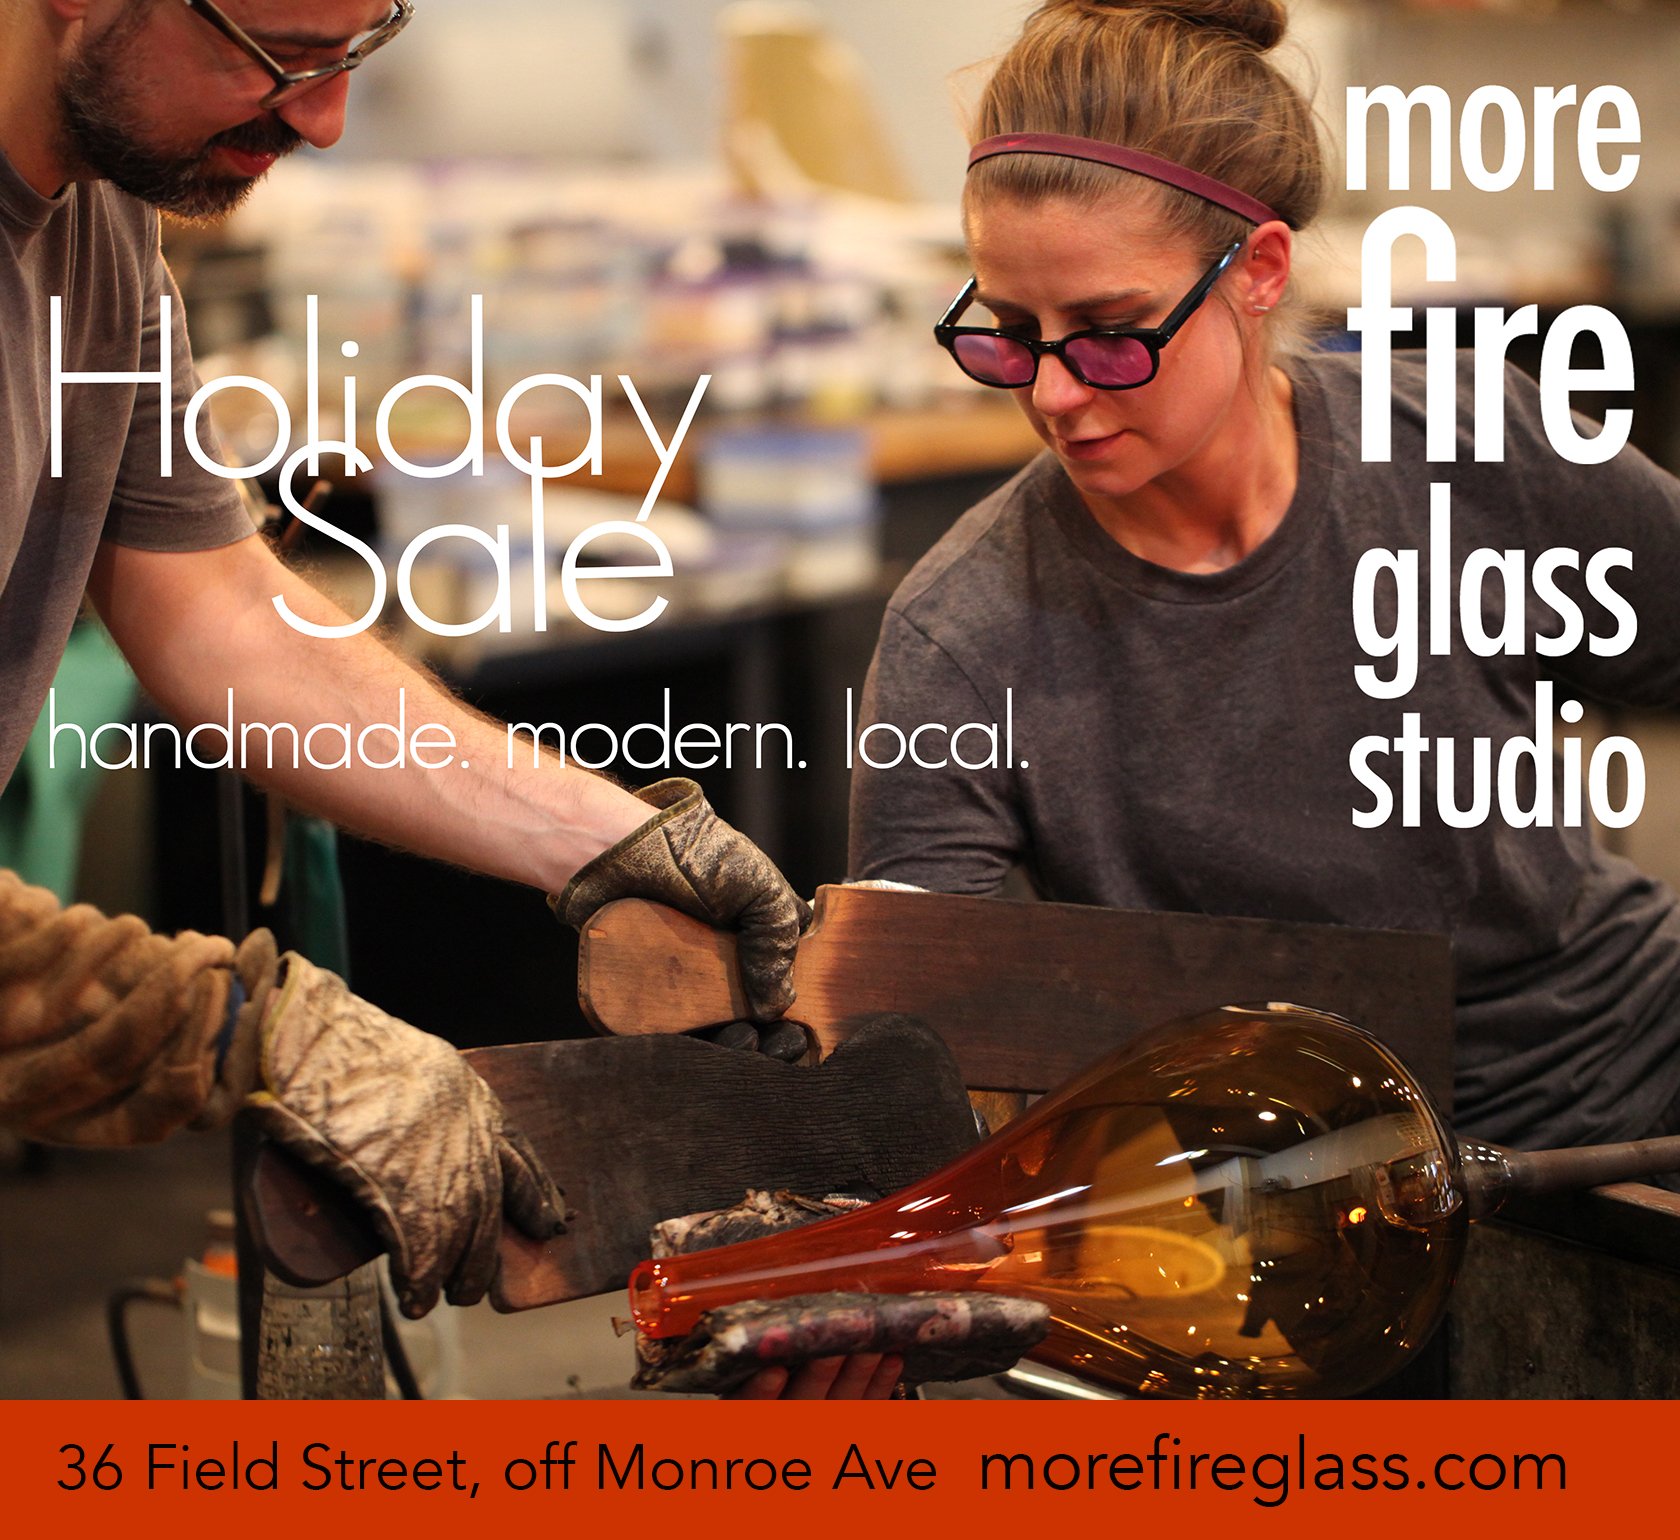 about — More Fire Glass Studio